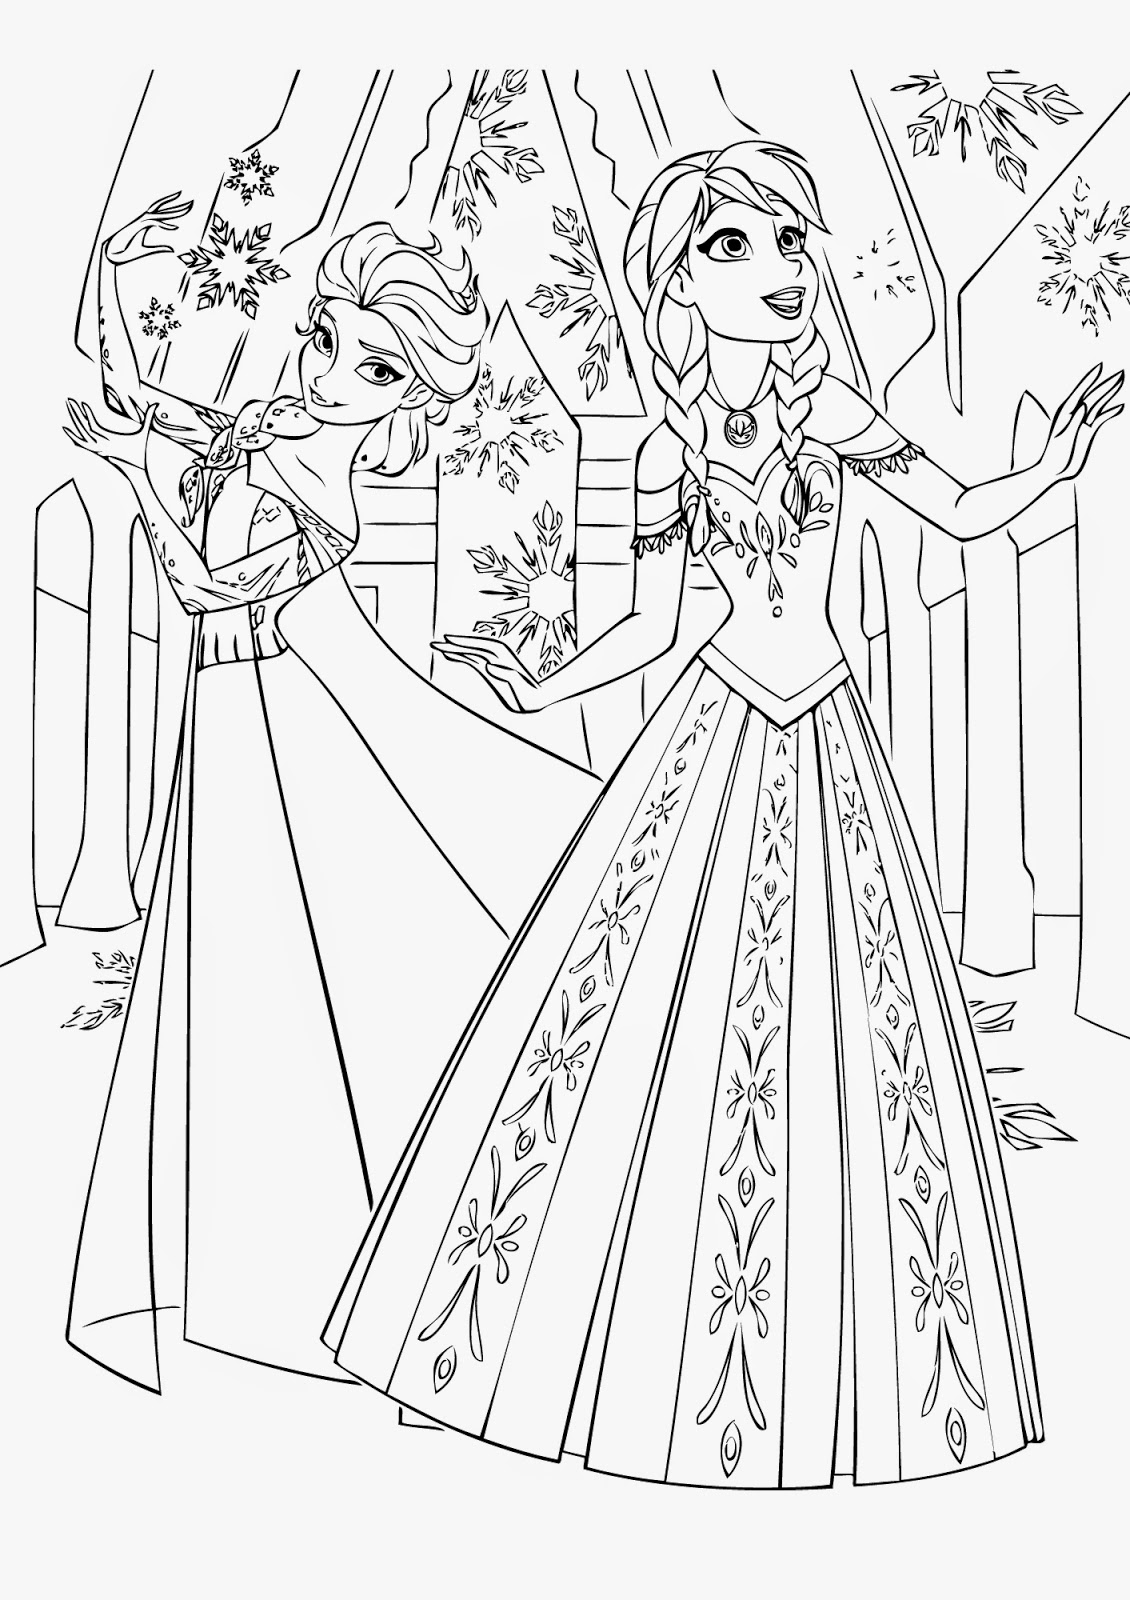 Find 16 Awesome Frozen Coloring Pages to Print ~ Instant ...